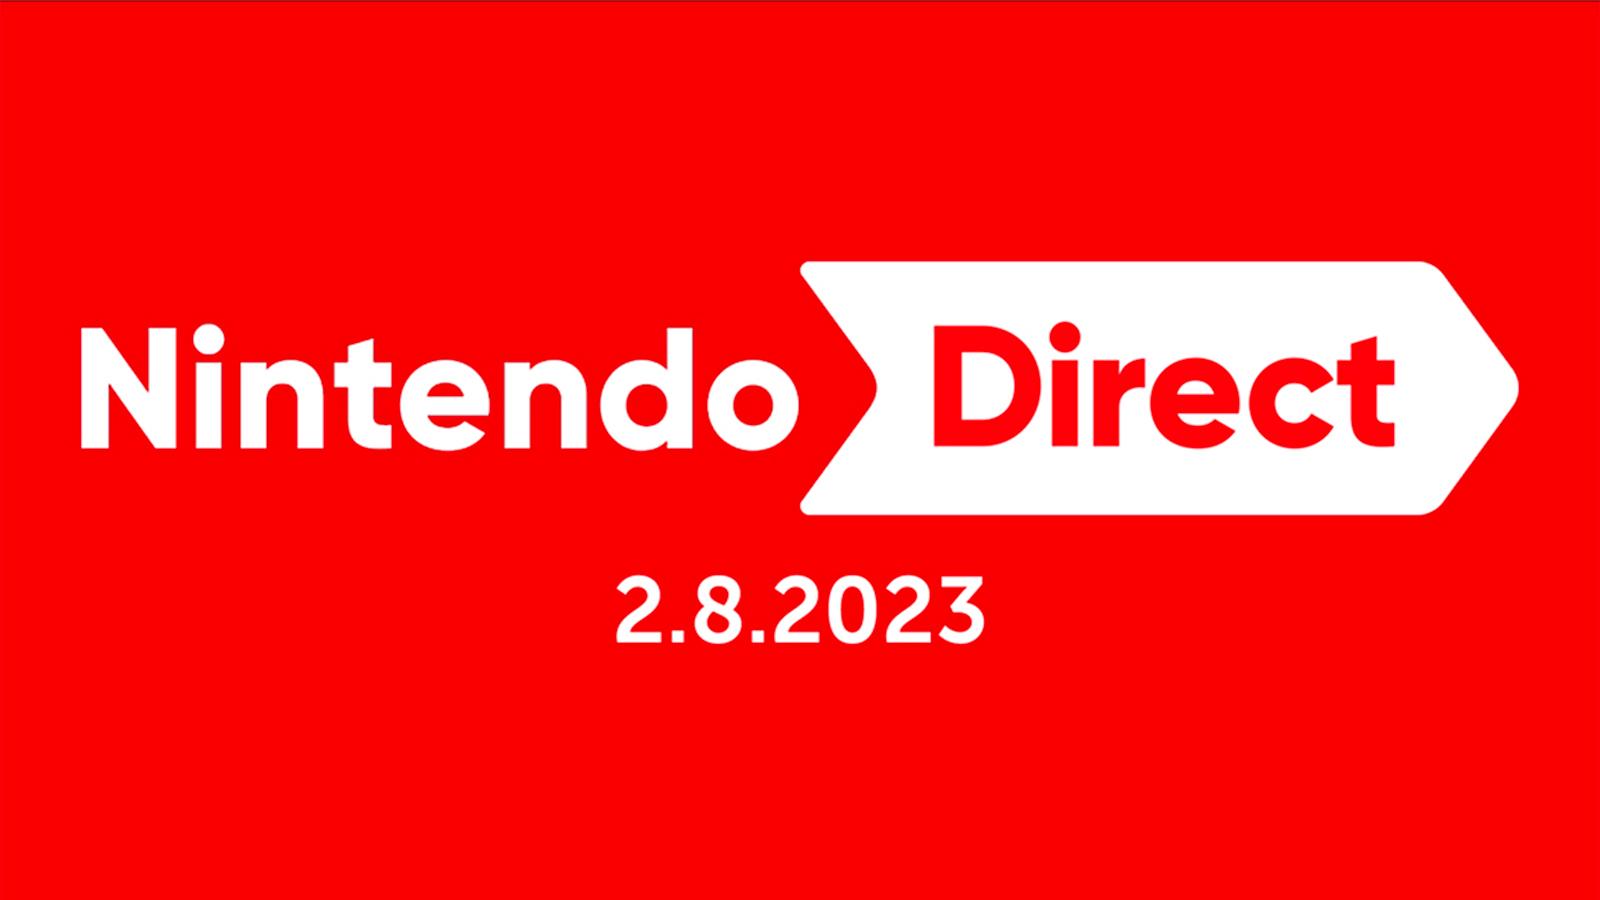 The Nintendo Direct Logo on a red background